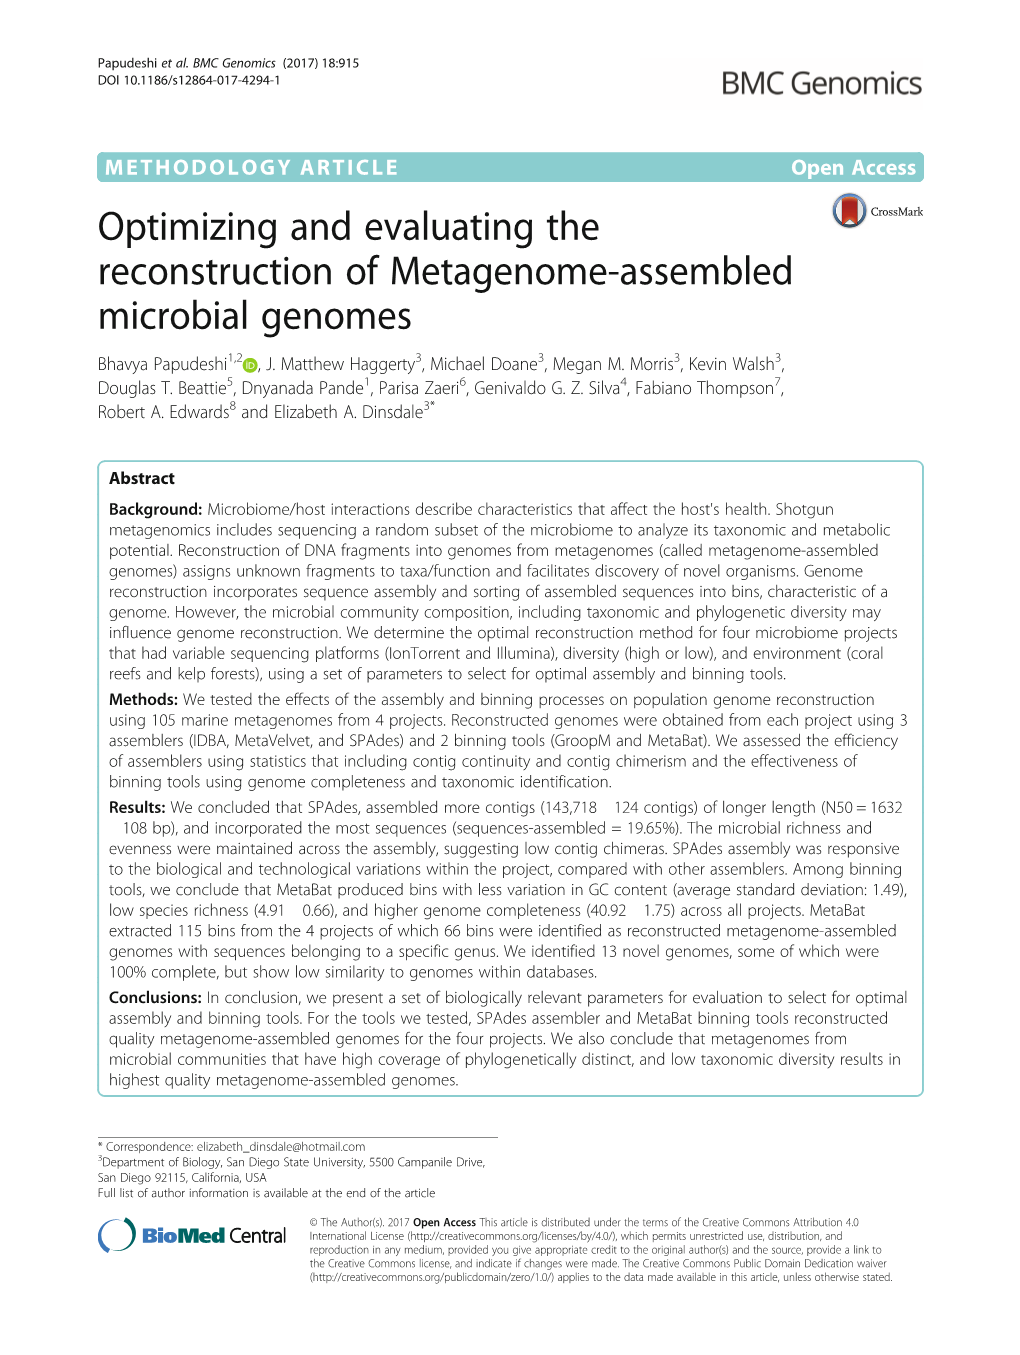 Optimizing and Evaluating the Reconstruction of Metagenome-Assembled Microbial Genomes Bhavya Papudeshi1,2 , J